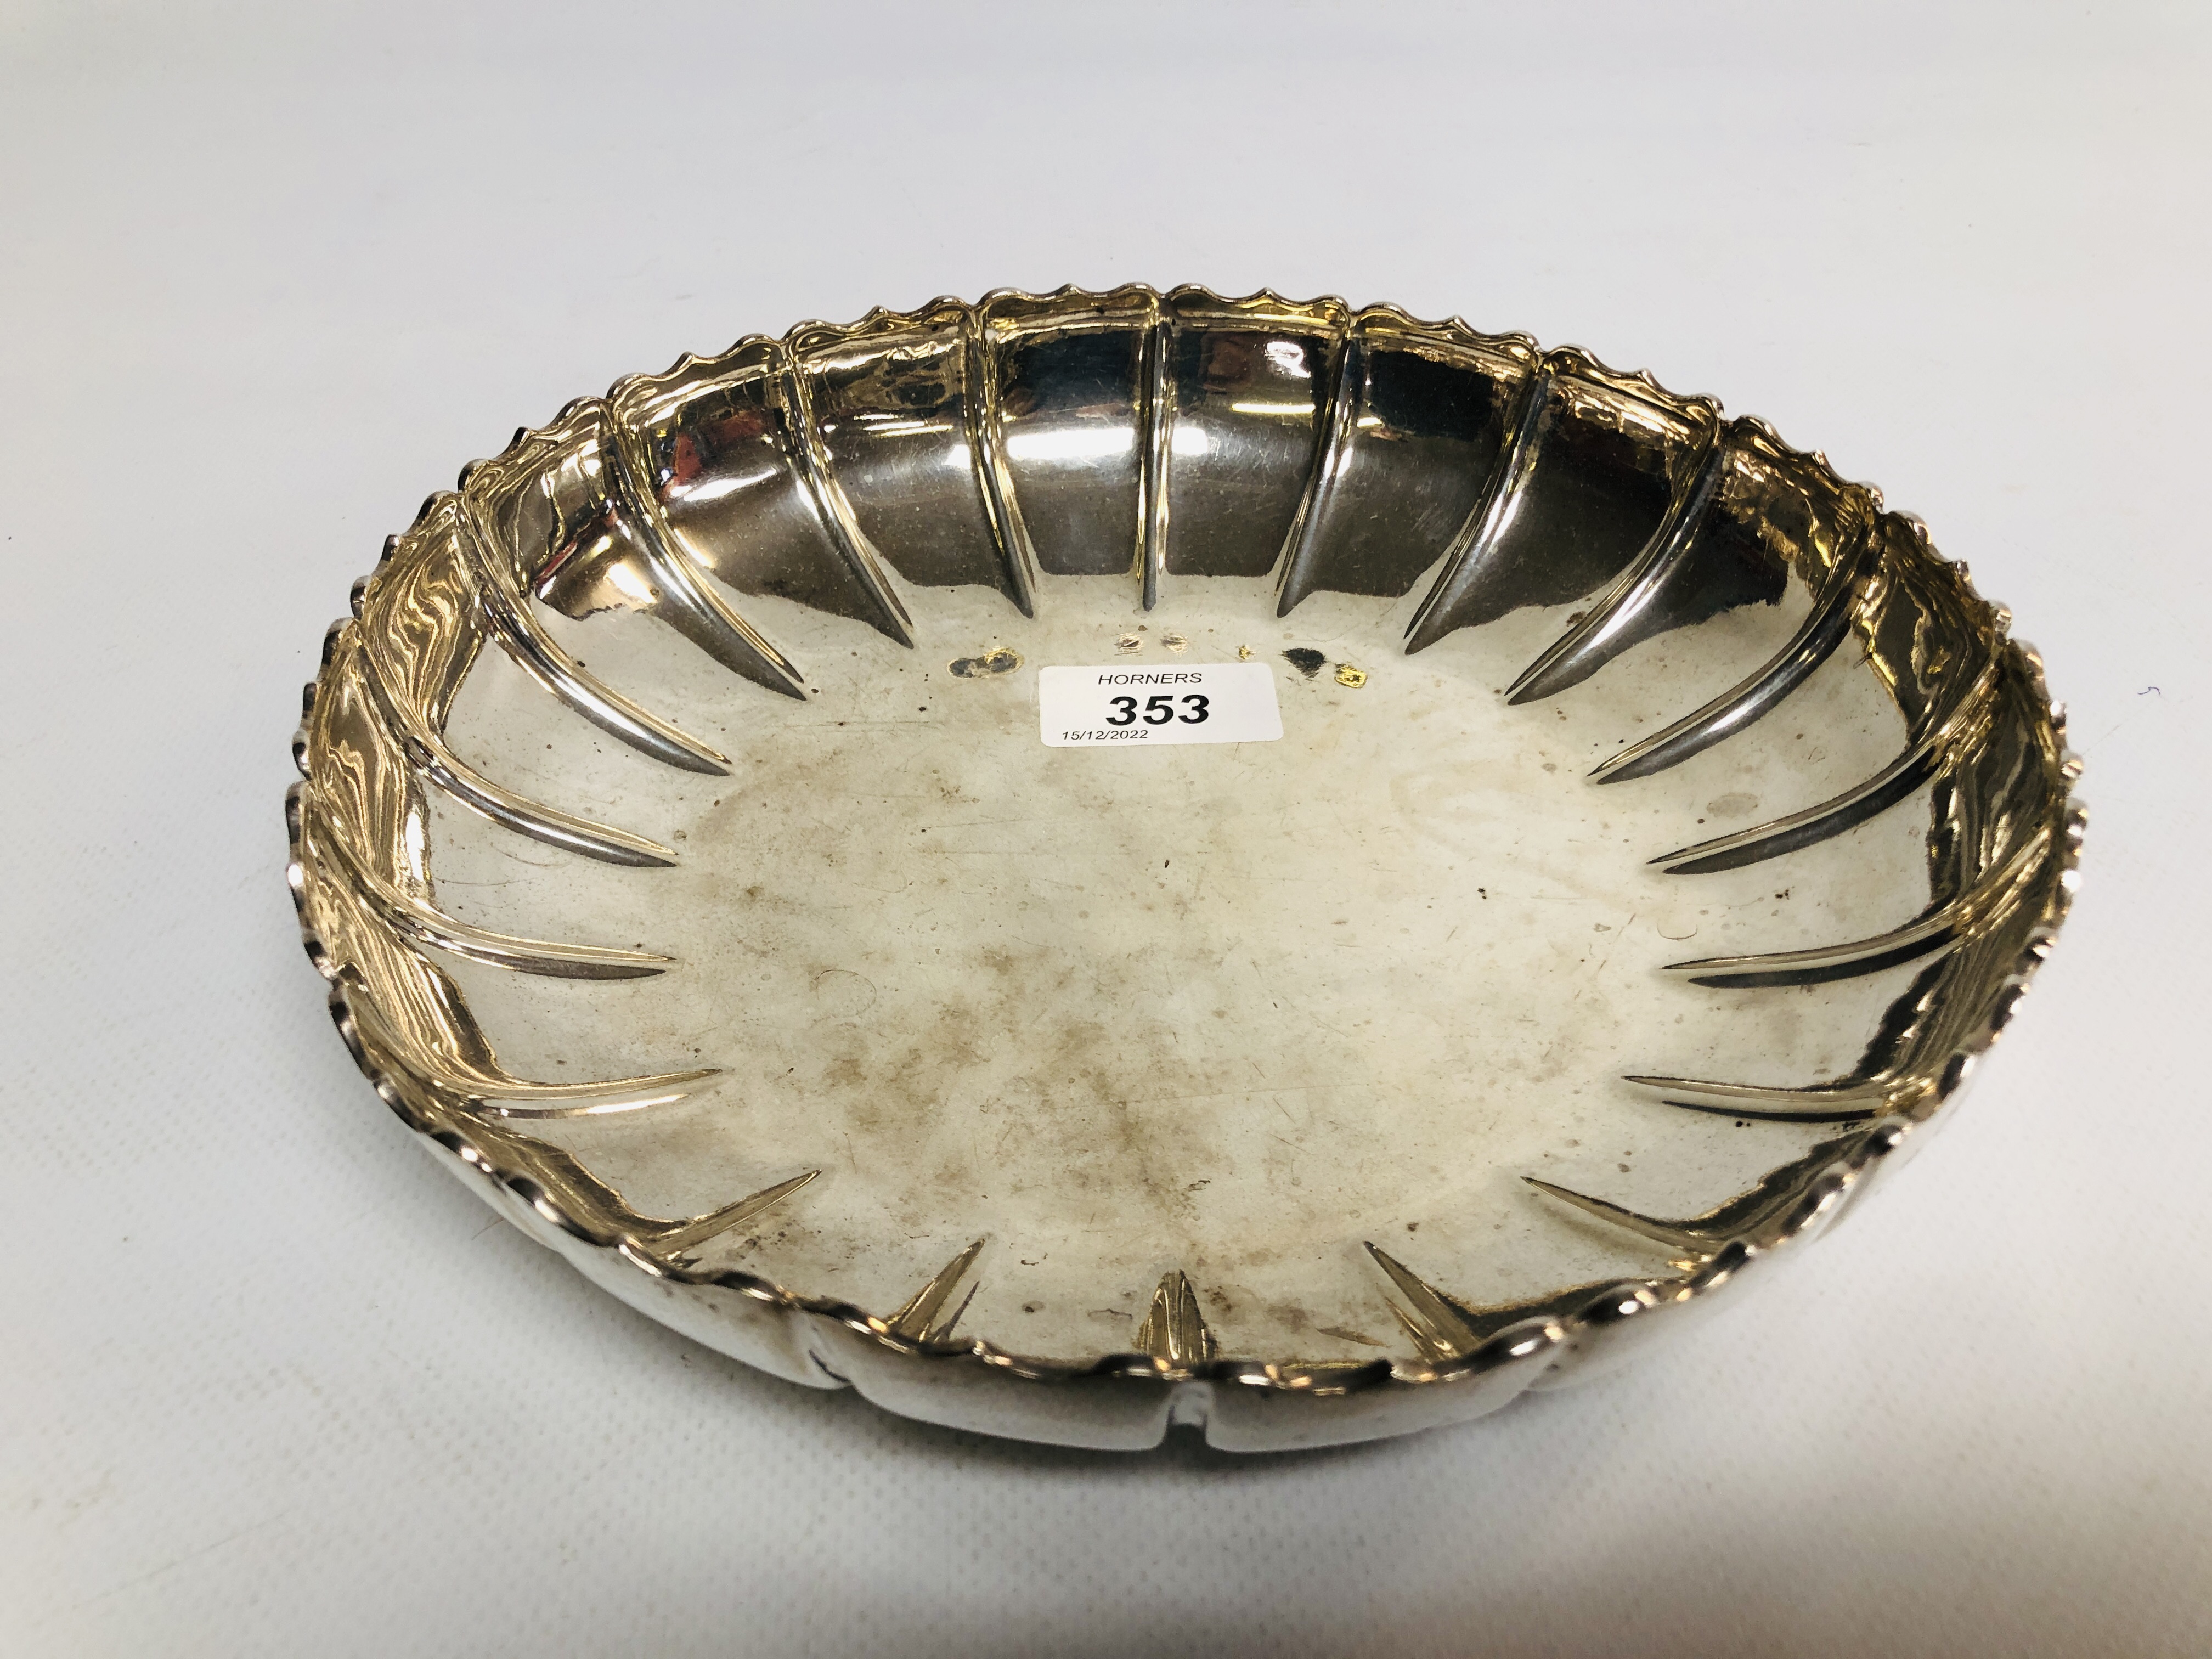 SILVER CIRCULAR DISH WITH FRILLED EDGE THE INTERIOR REEDED, LONDON 1900, D 21.5CM. - Image 2 of 8